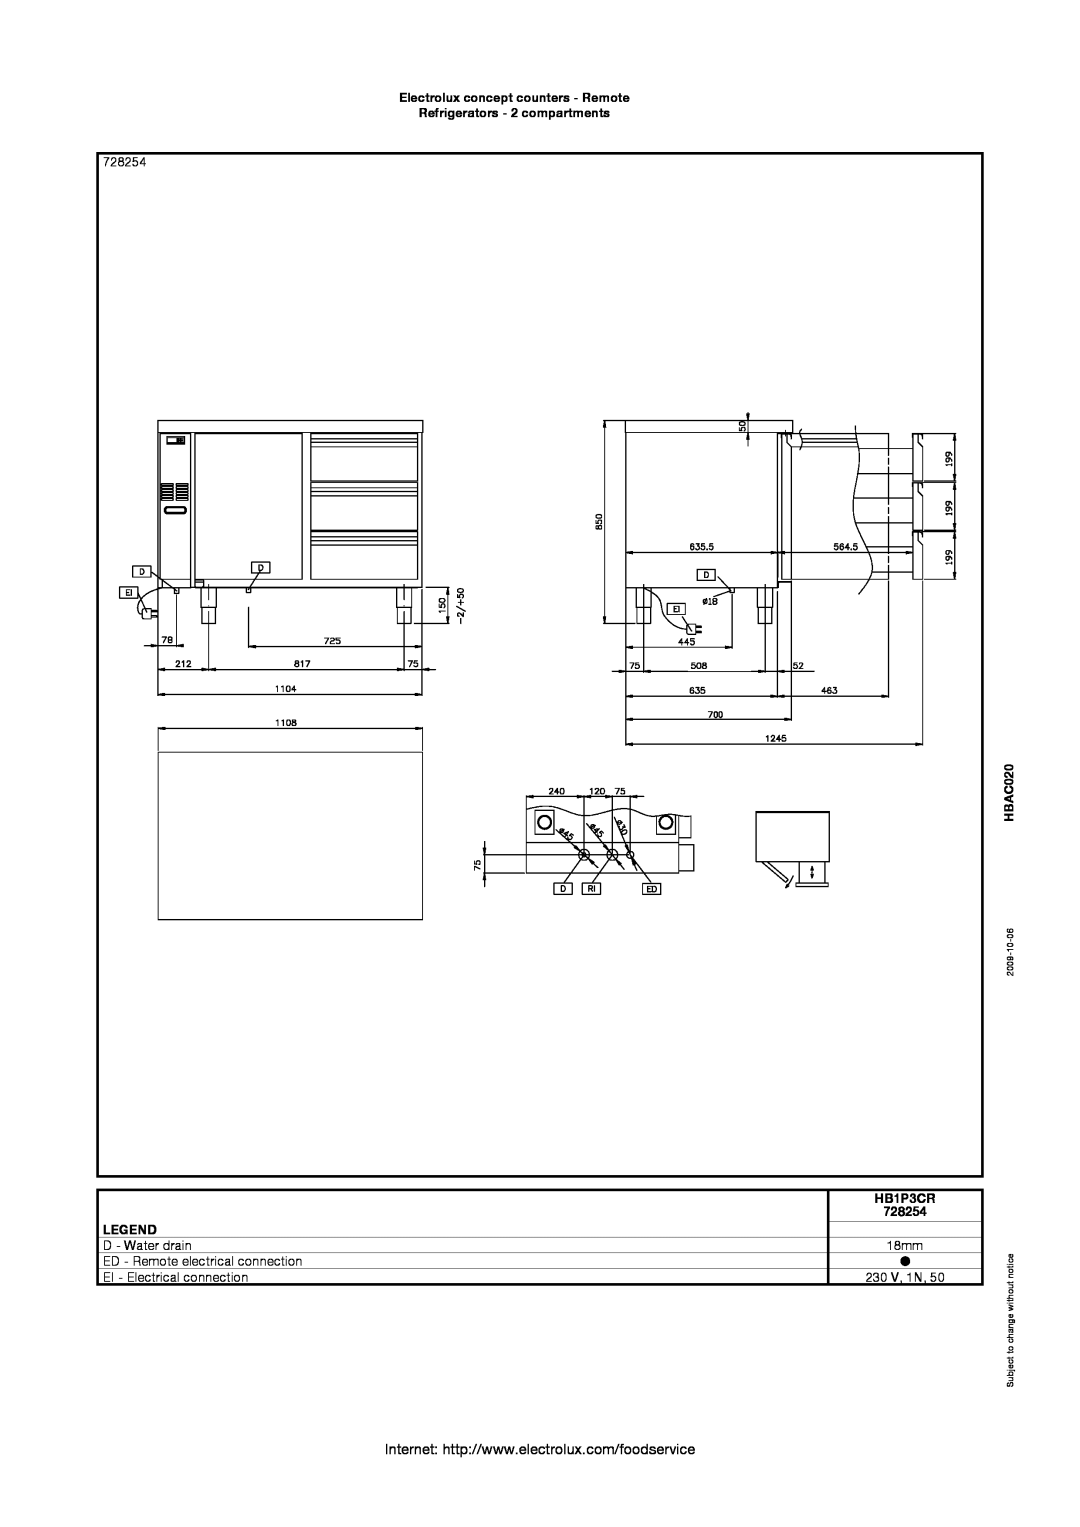 Electrolux 728254, HB4CR Electrolux concept counters - Remote Refrigerators - 2 compartments, HBAC020, HB1P3CR, 2009-10-06 